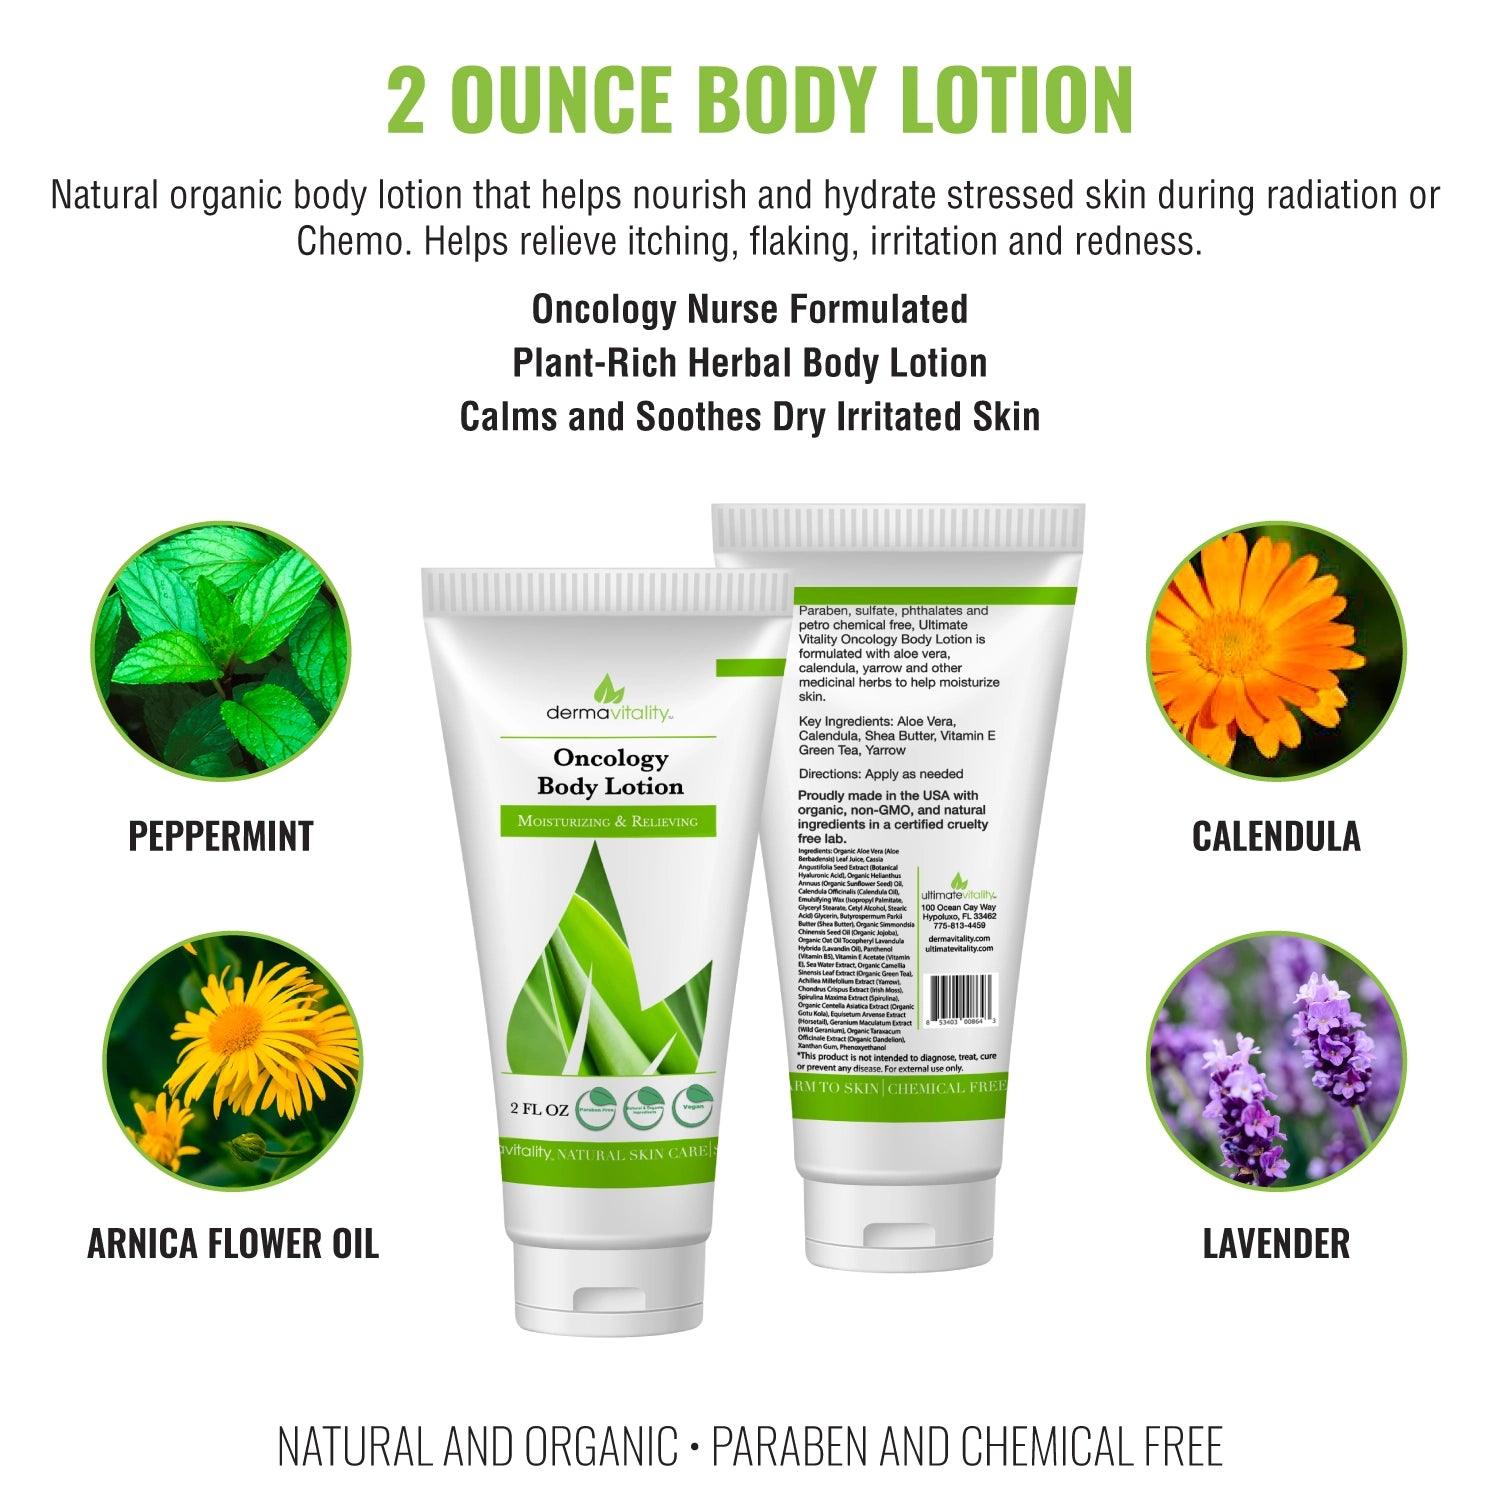 2 ounce oncology body lotion